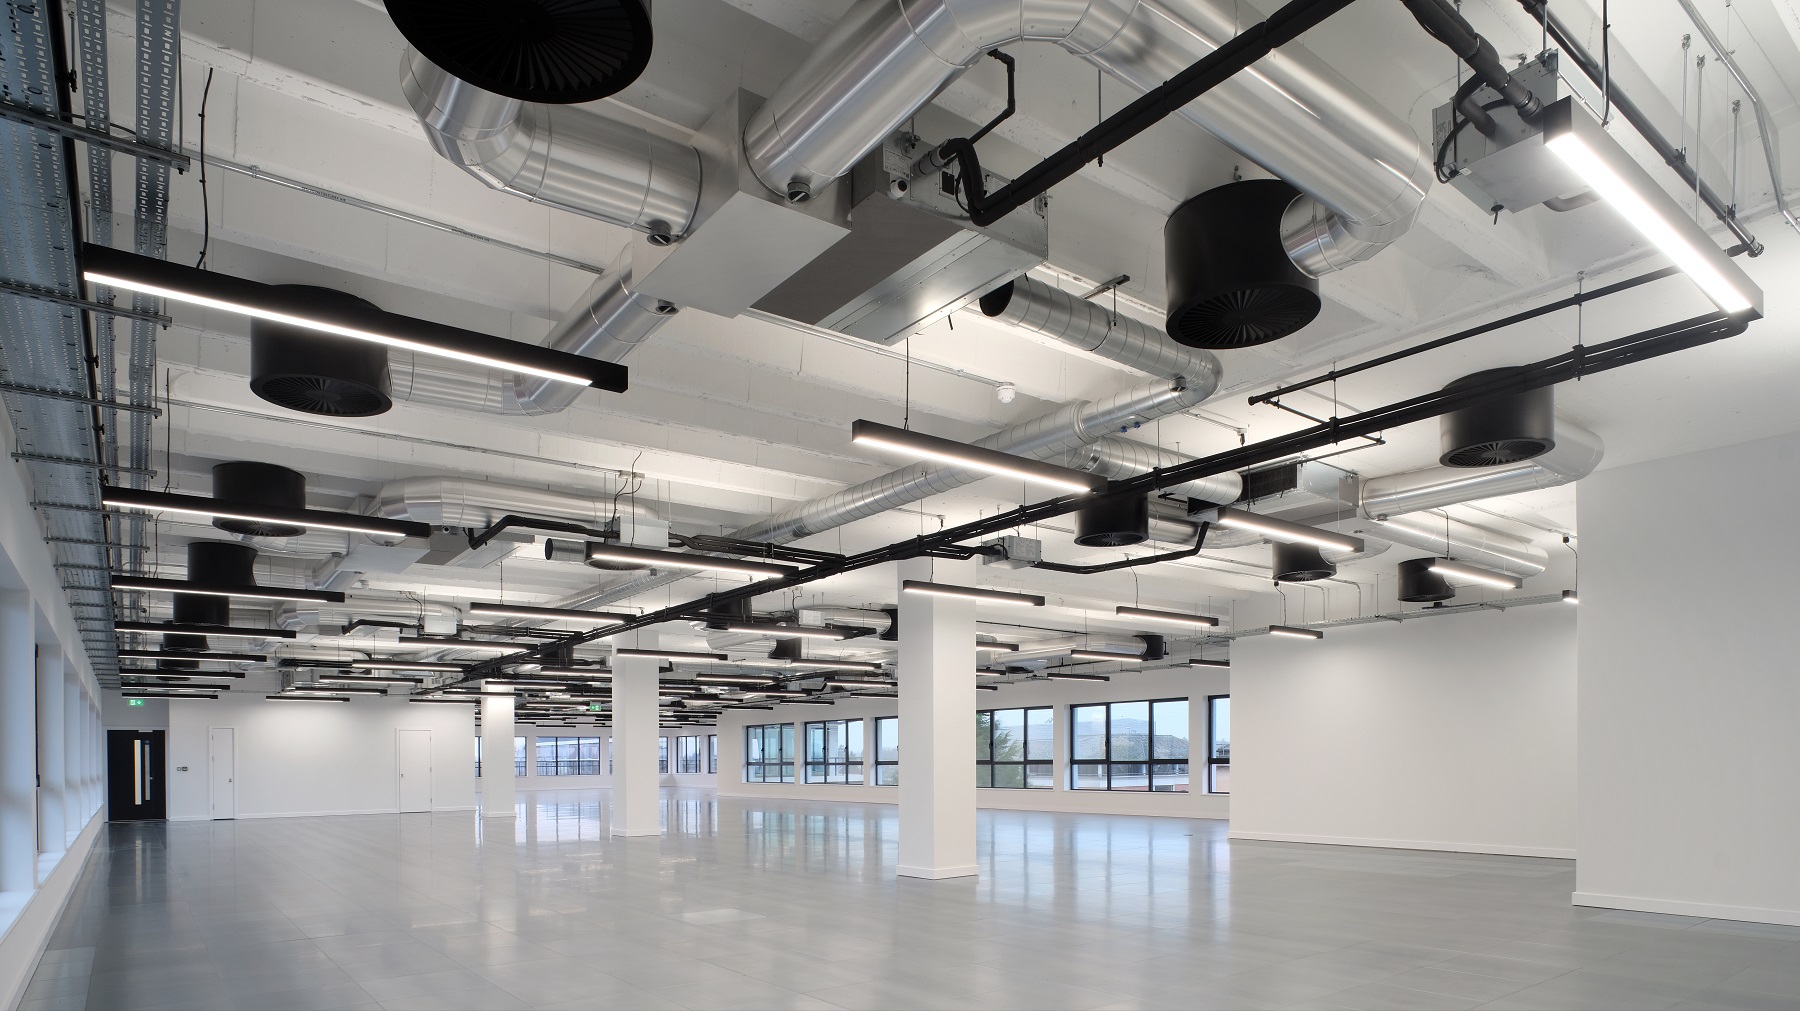 Daikin heat recovery systems give prime office building new lease of life. main image